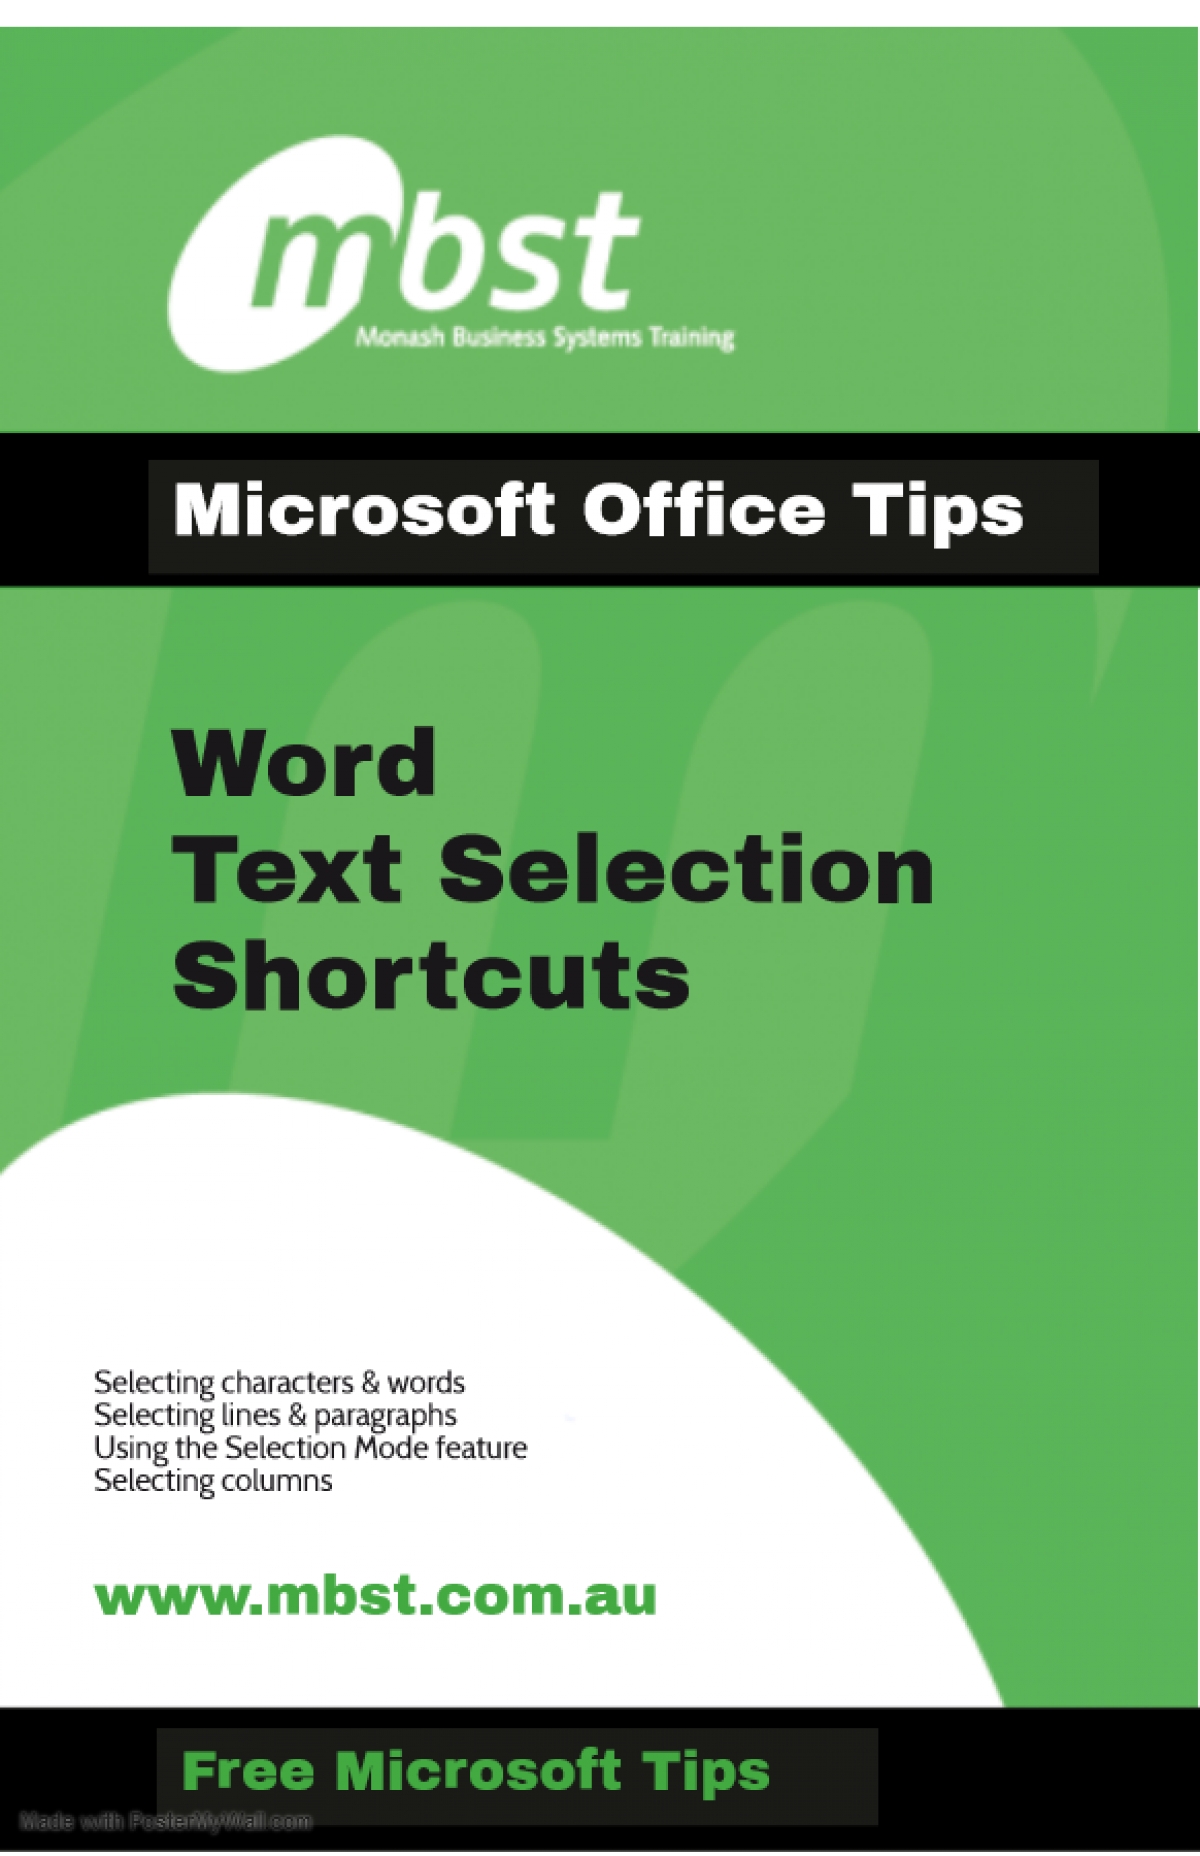 Word Text Selection Shortcuts